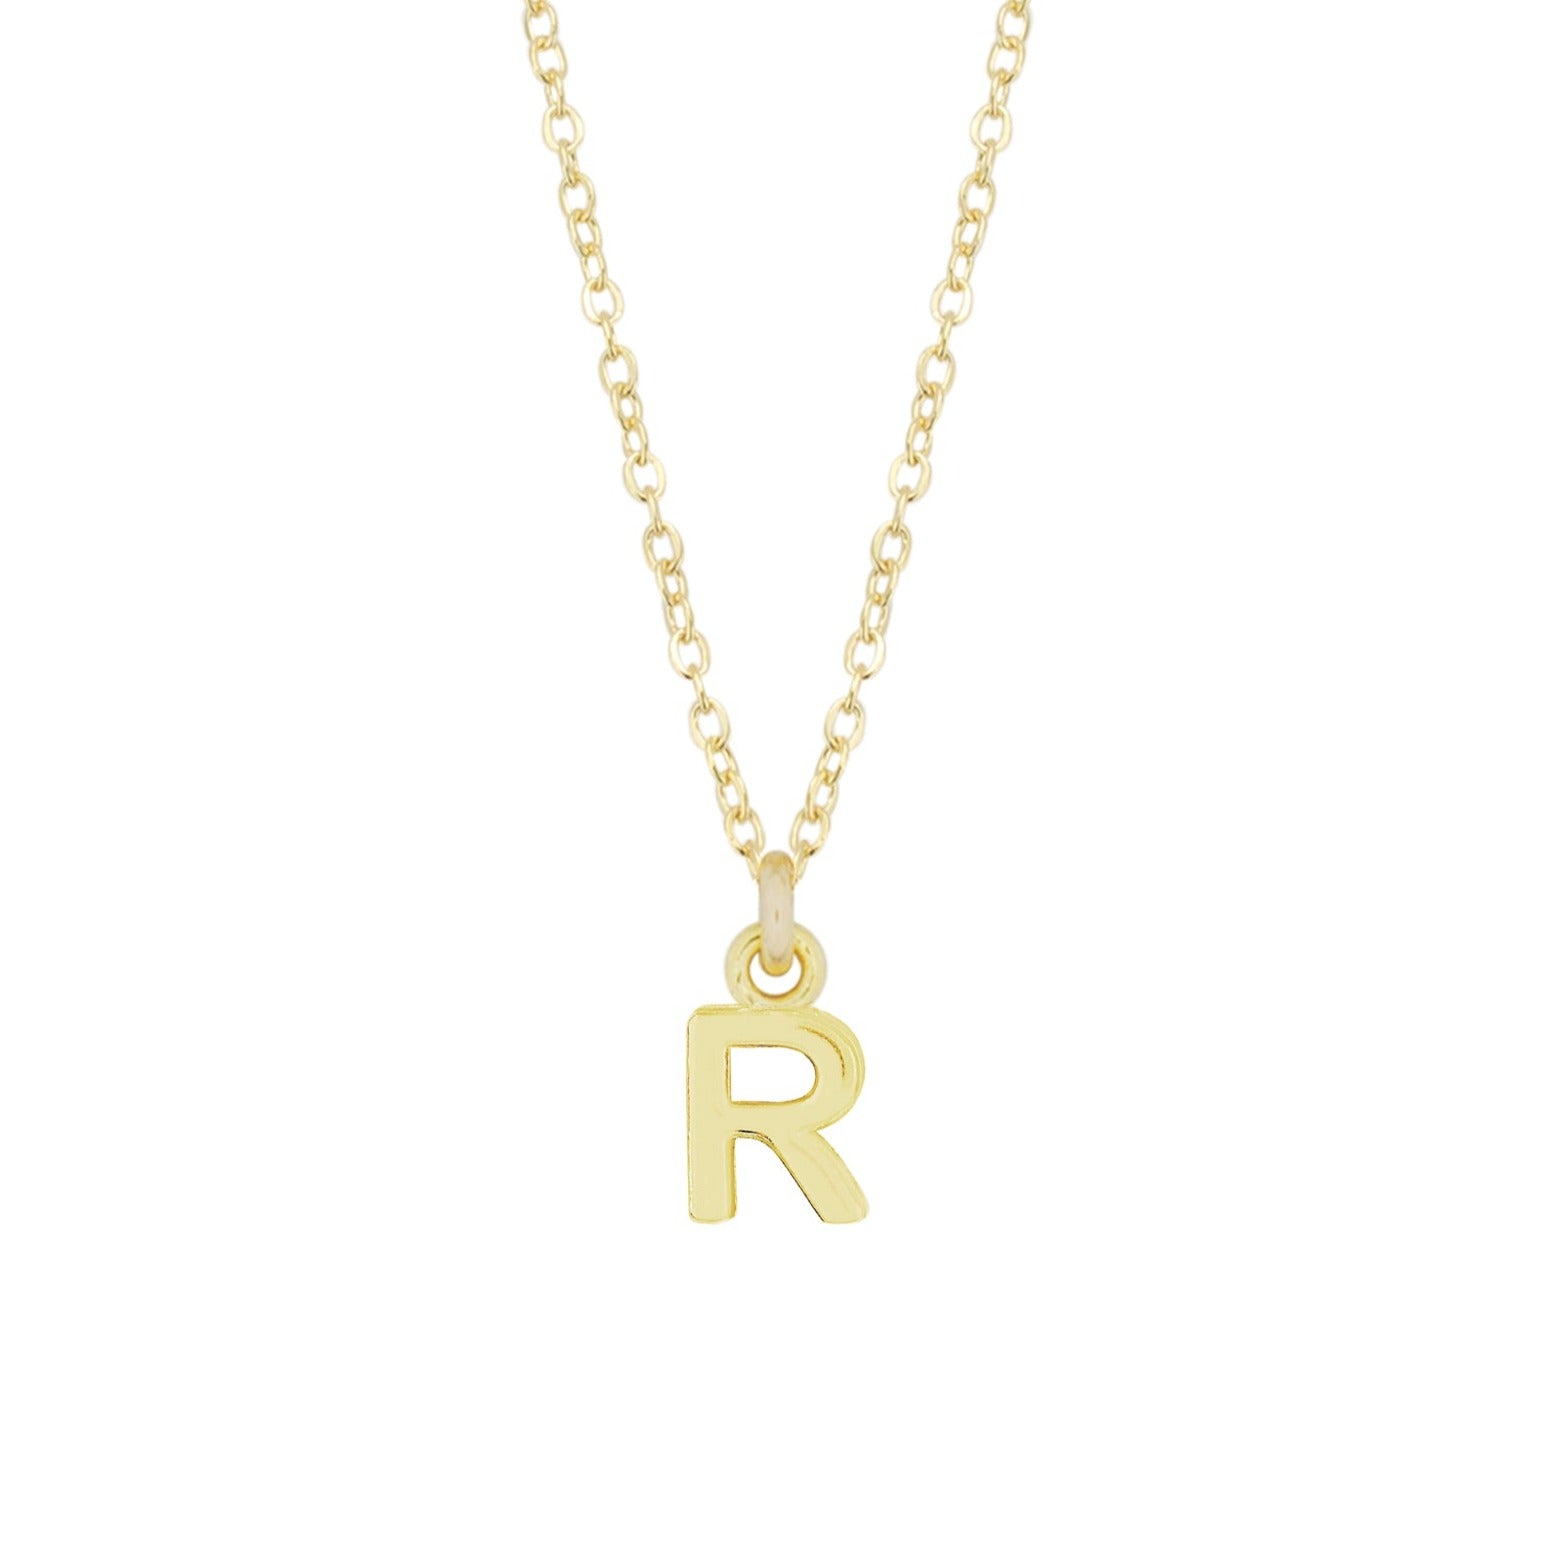 R Gold Initial Necklace by Katie Dean Jewelry, made in America, perfect for the dainty minimal jewelry lovers